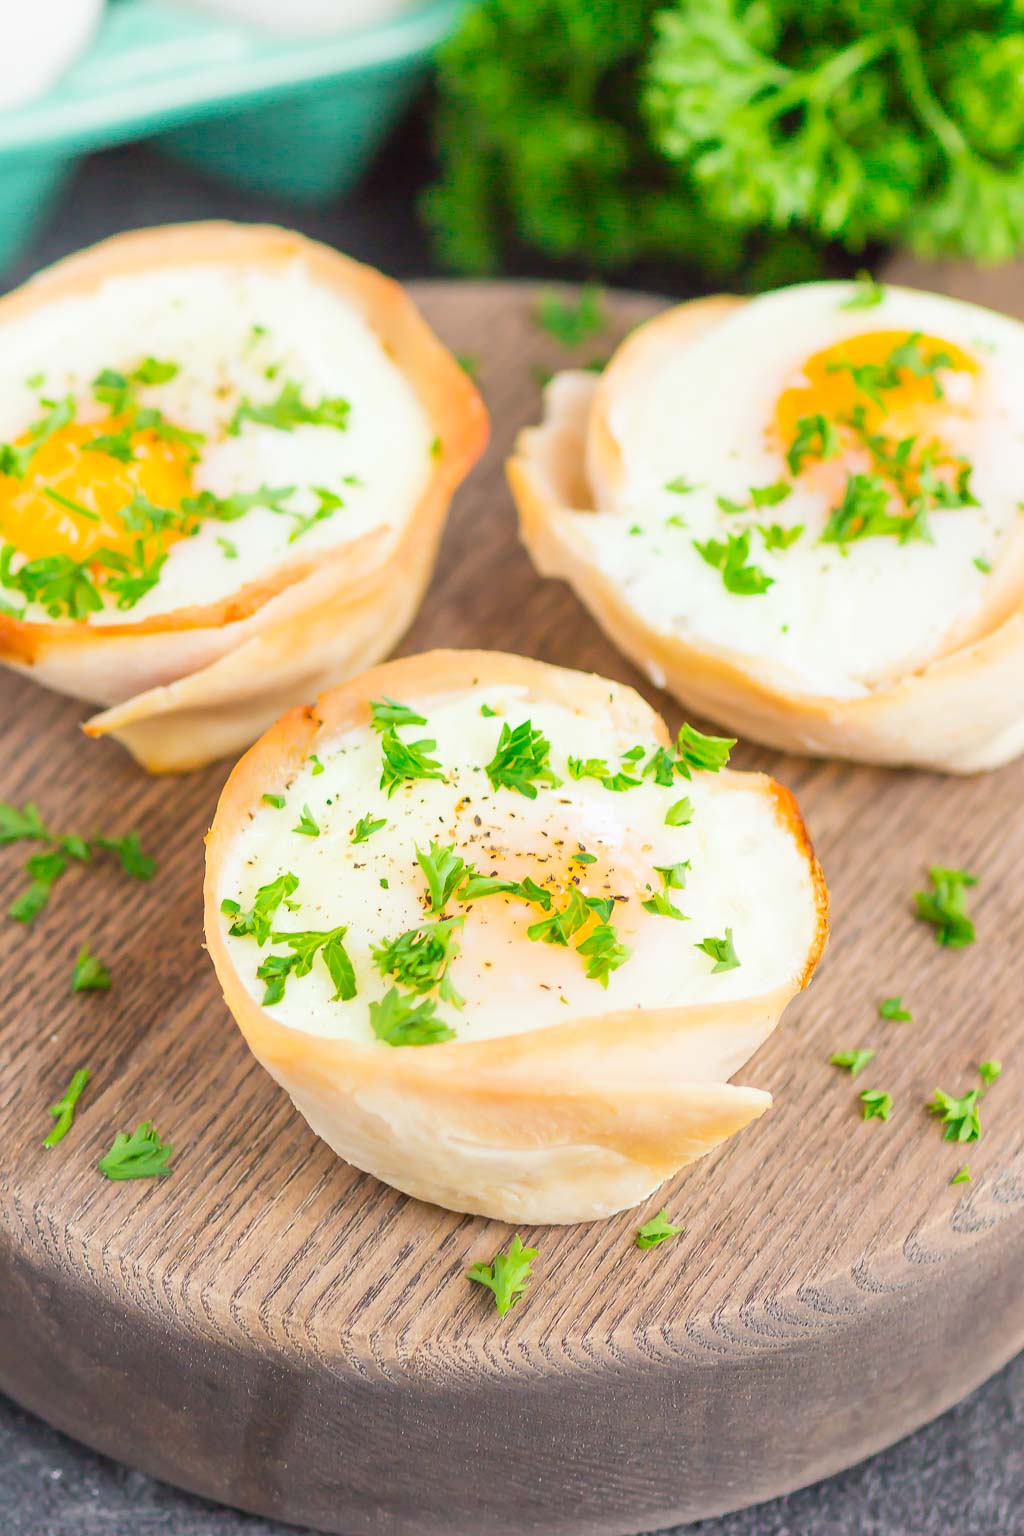 These Turkey Egg Cups are loaded with flavor and perfect for a quick and hearty breakfast. Made with just a few ingredients and ready in less than 30 minutes, this easy dish is a great way to start the day! #eggs #eggcups #eggmuffins #turkeycups #turkeyeggcups